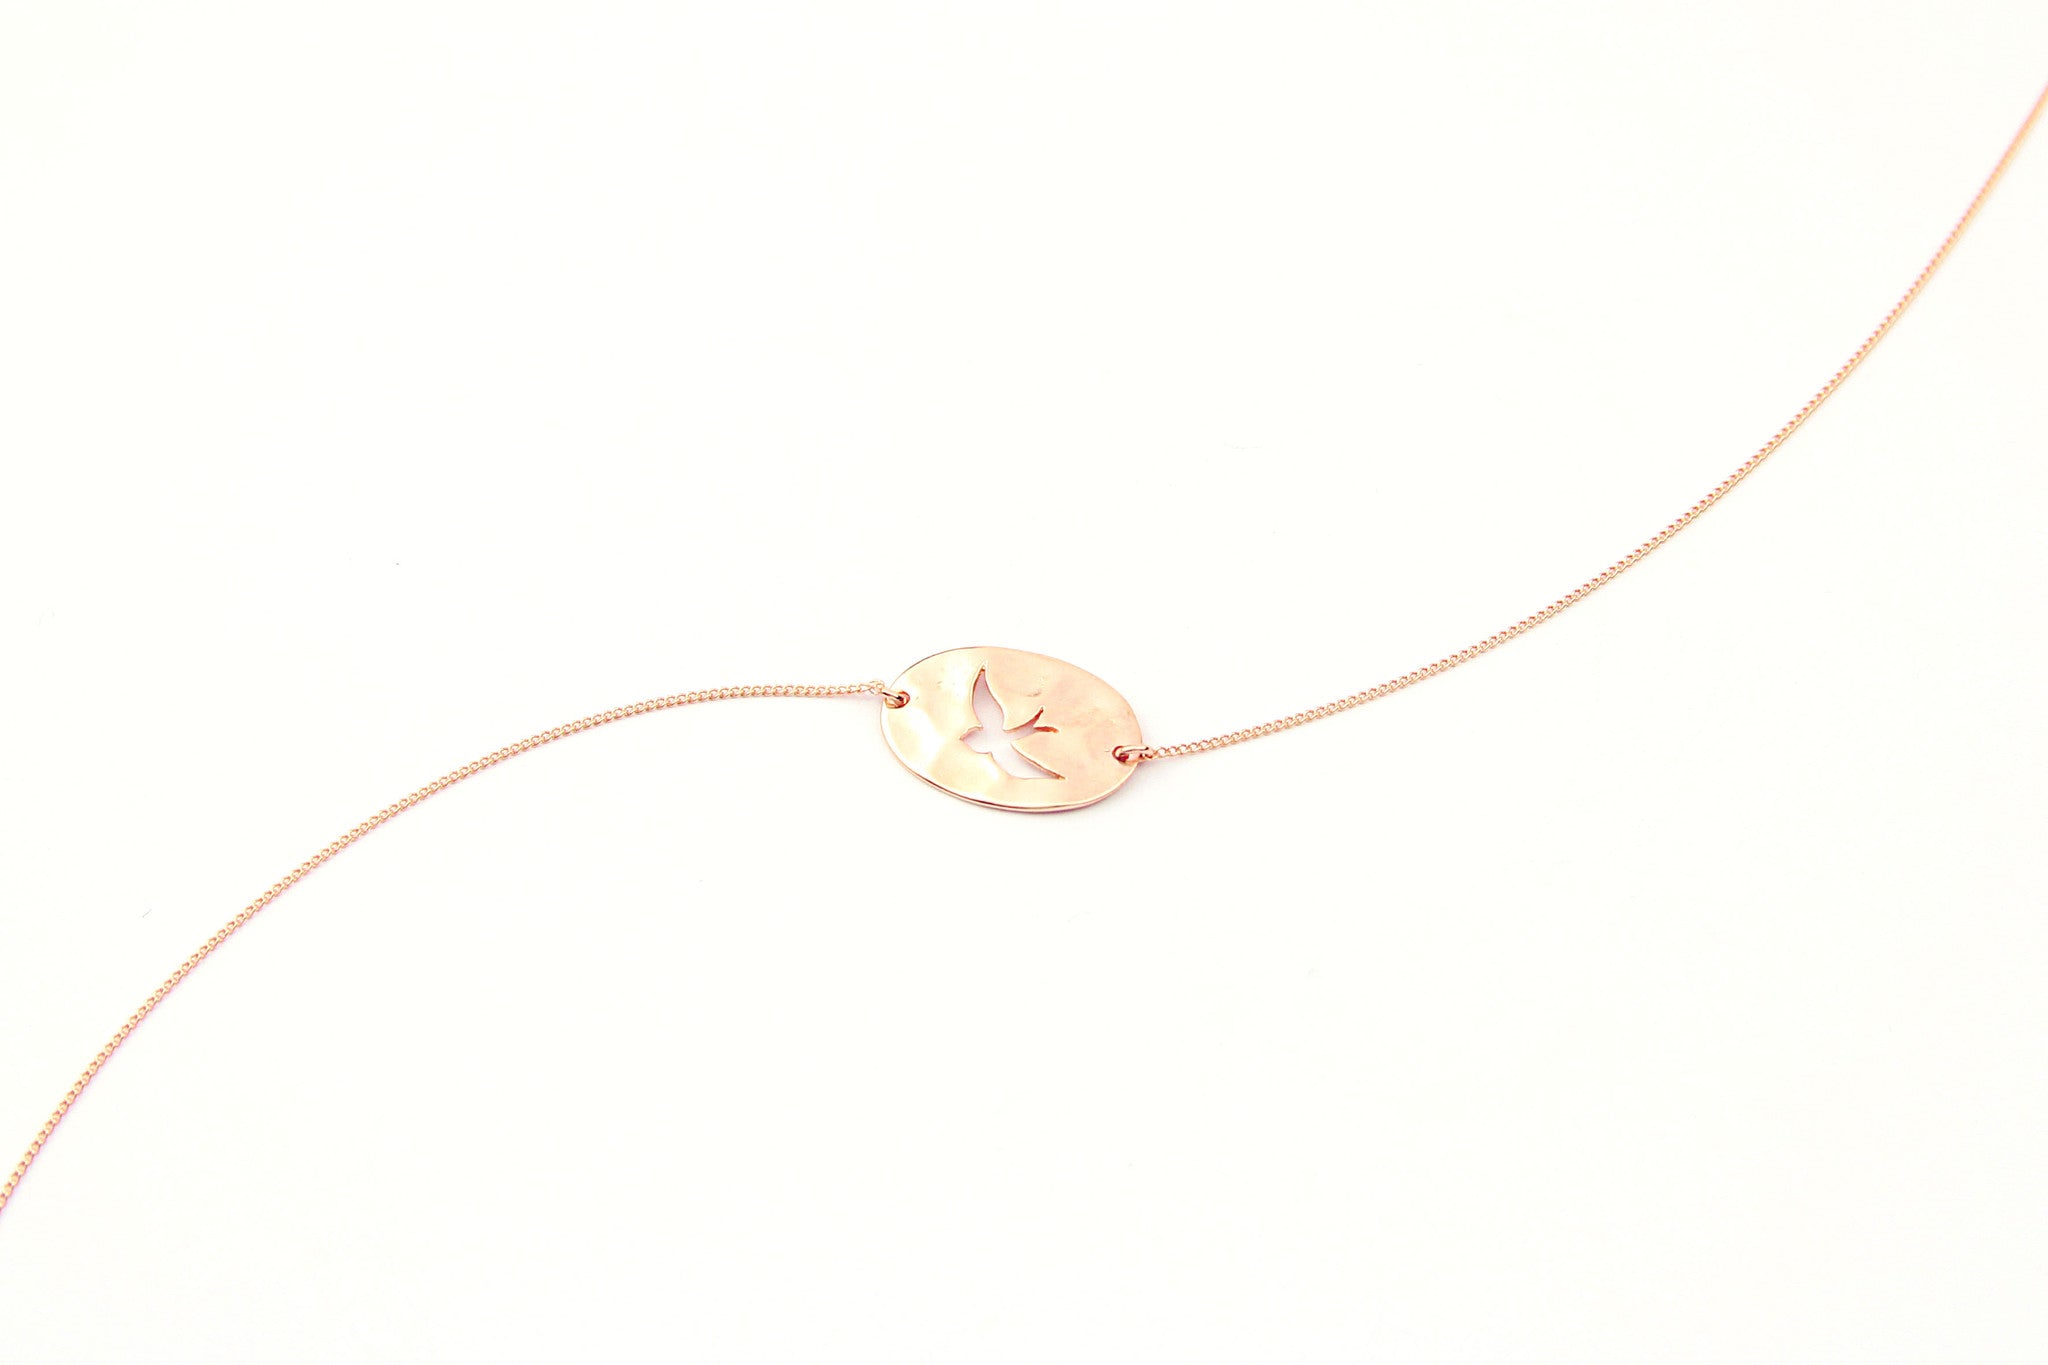 jewelberry necklace kette cut out swallow curb chain rose gold plated sterling silver fine jewelry handmade with love fairtrade